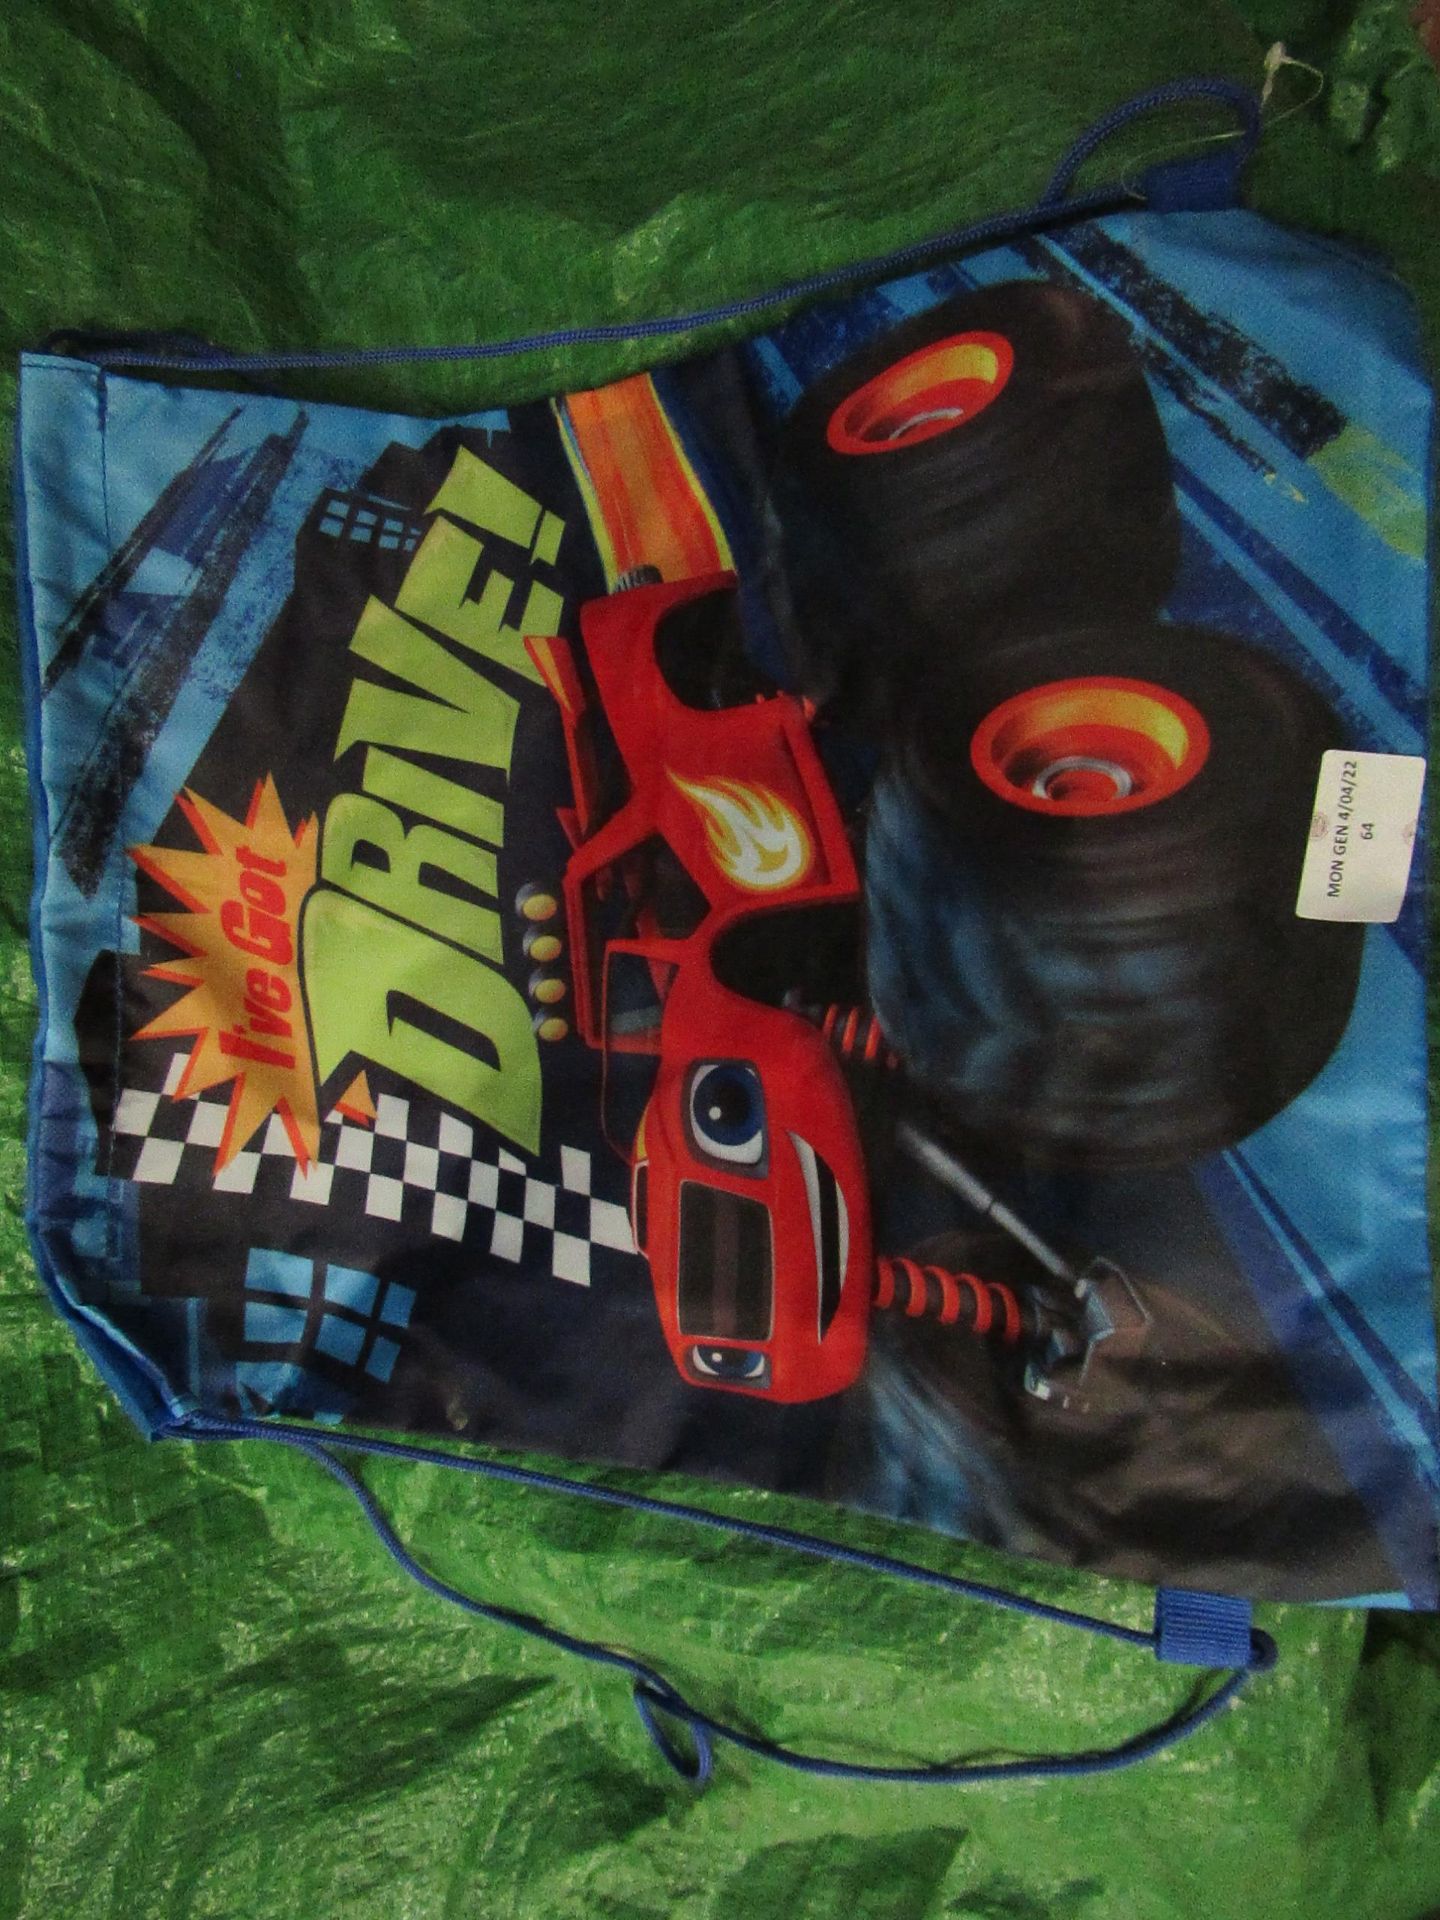 5x Nickelodeon - Blaze & The Monster Machines Shoe Bags - All Unused With Tags.